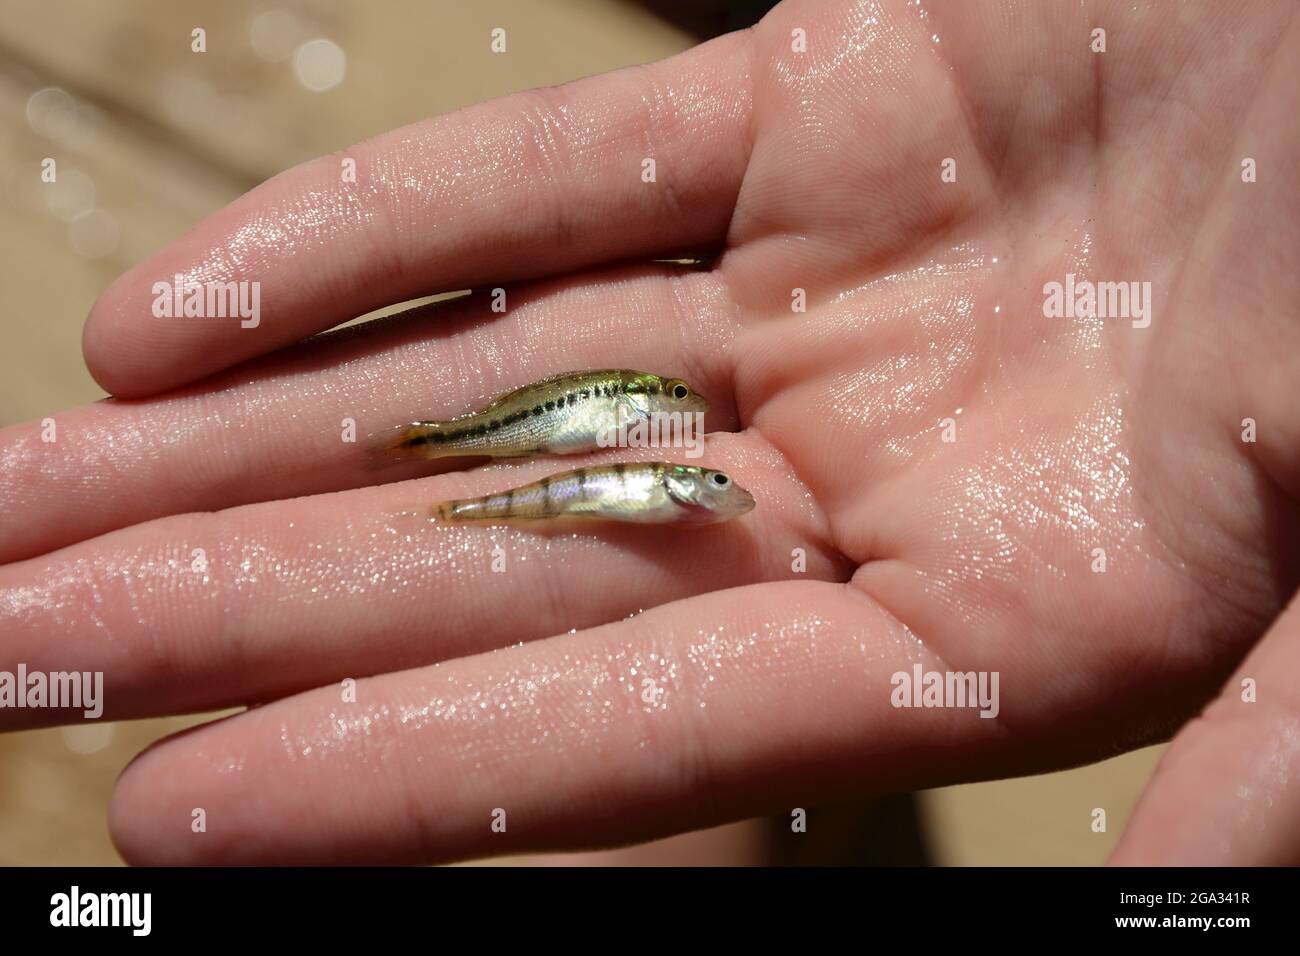 Largemouth bass (Micropterus salmoides) and yellow perch (Perca flavescens) babies in a wet hand; New York, United States of America Stock Photo